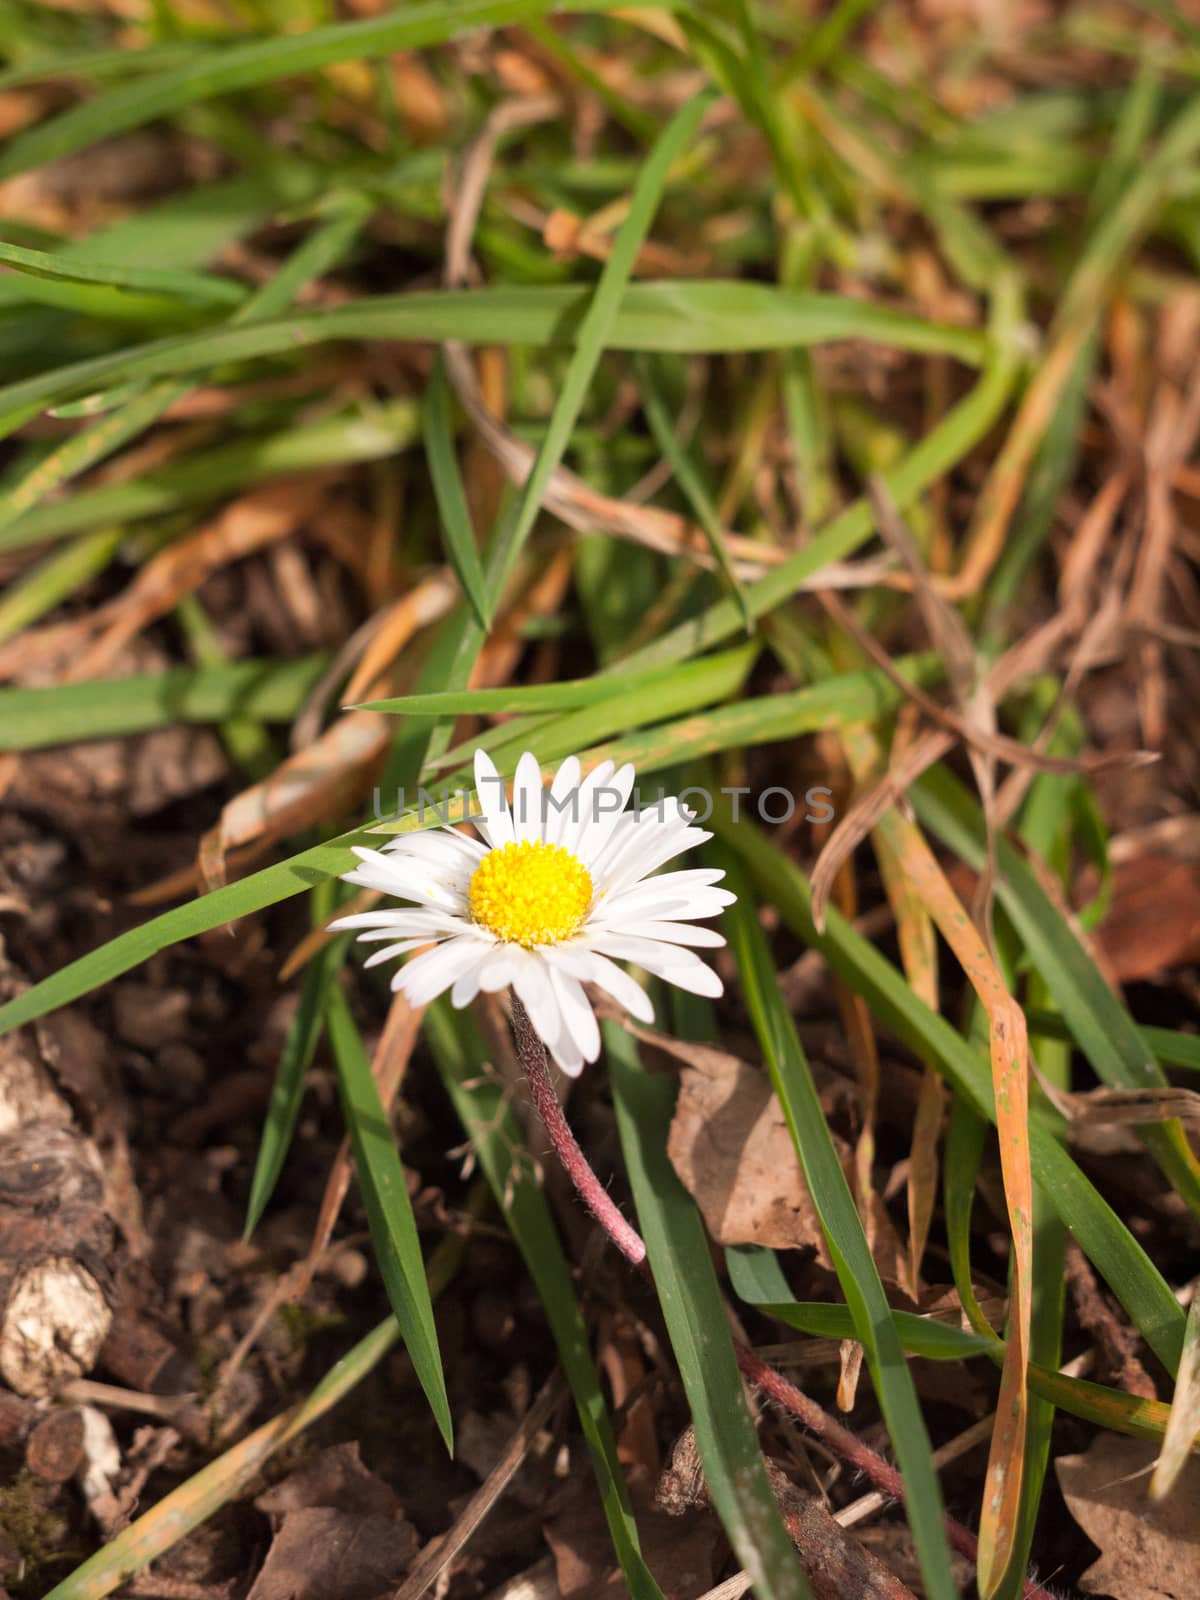 Horizontal White Daisy Flower Head with High Detail and Sunlight, with Grass Leaves on the Floor Serene and Peaceful